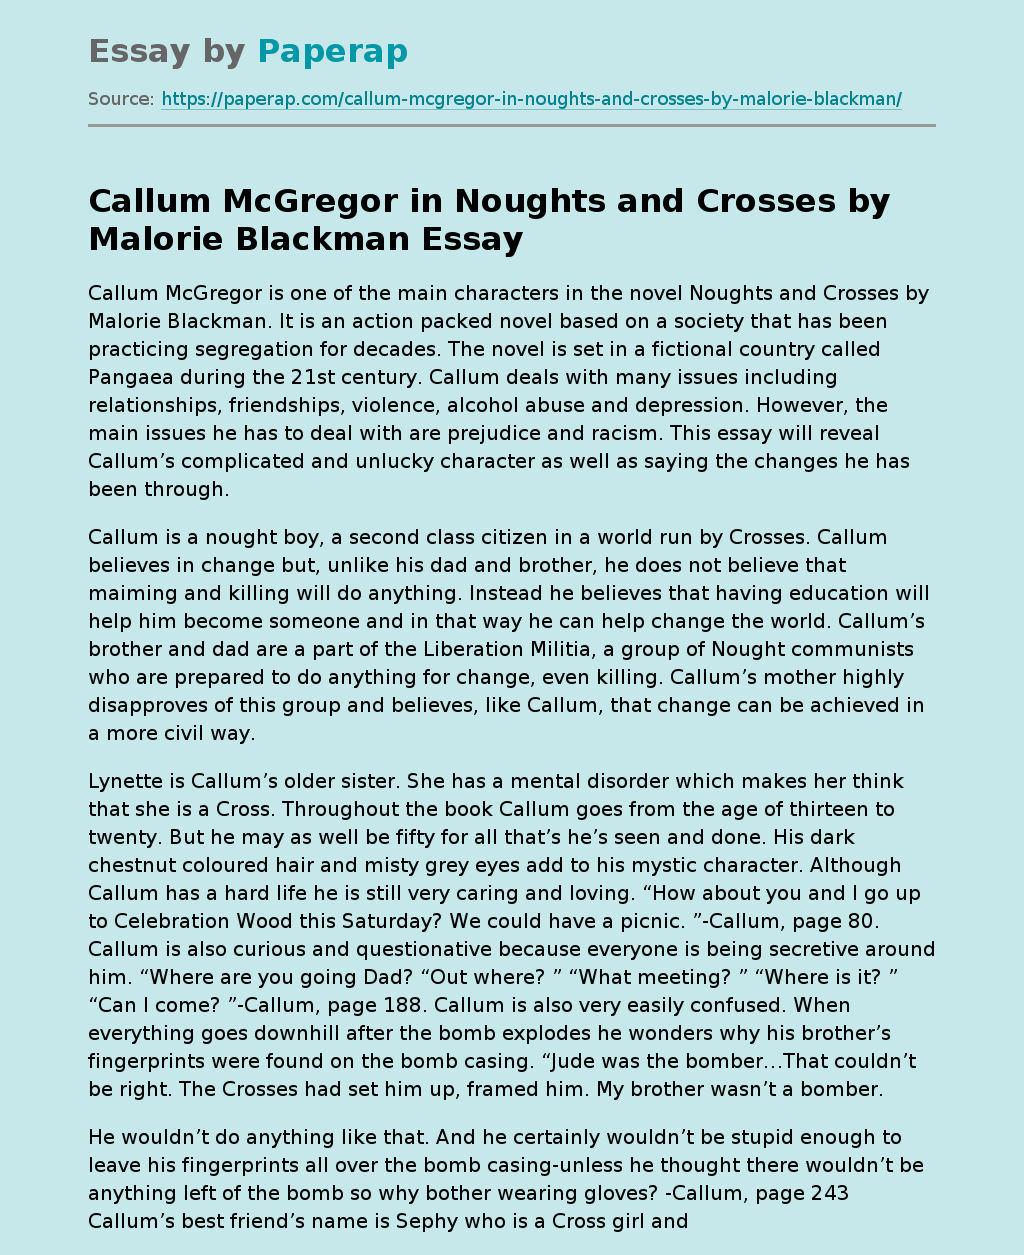 Callum McGregor in Noughts and Crosses by Malorie Blackman